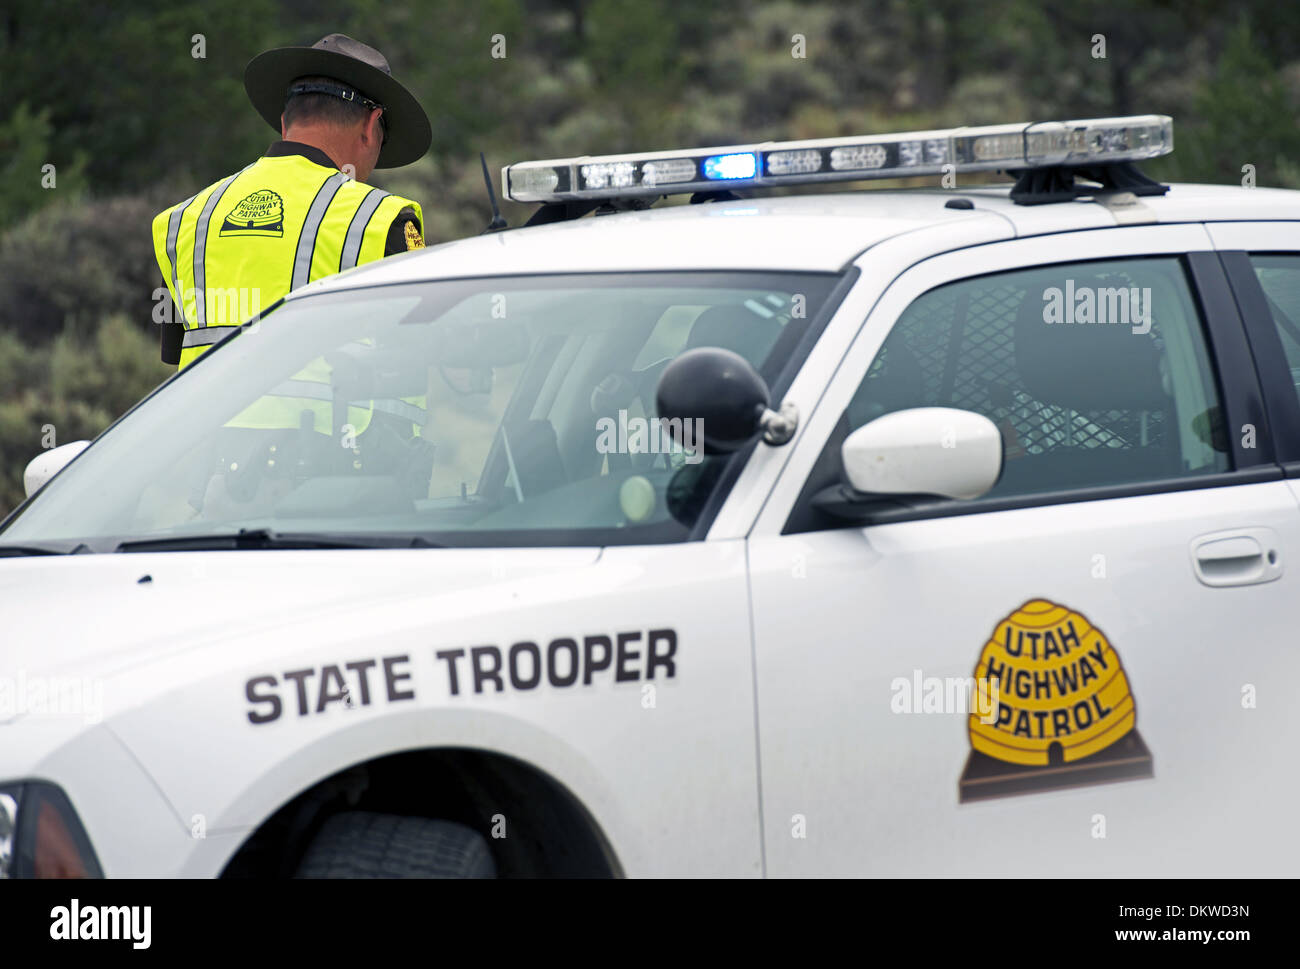 Utah State Trooper Cruiser. Police Car and Trooper. Police Photo Collection. Stock Photo